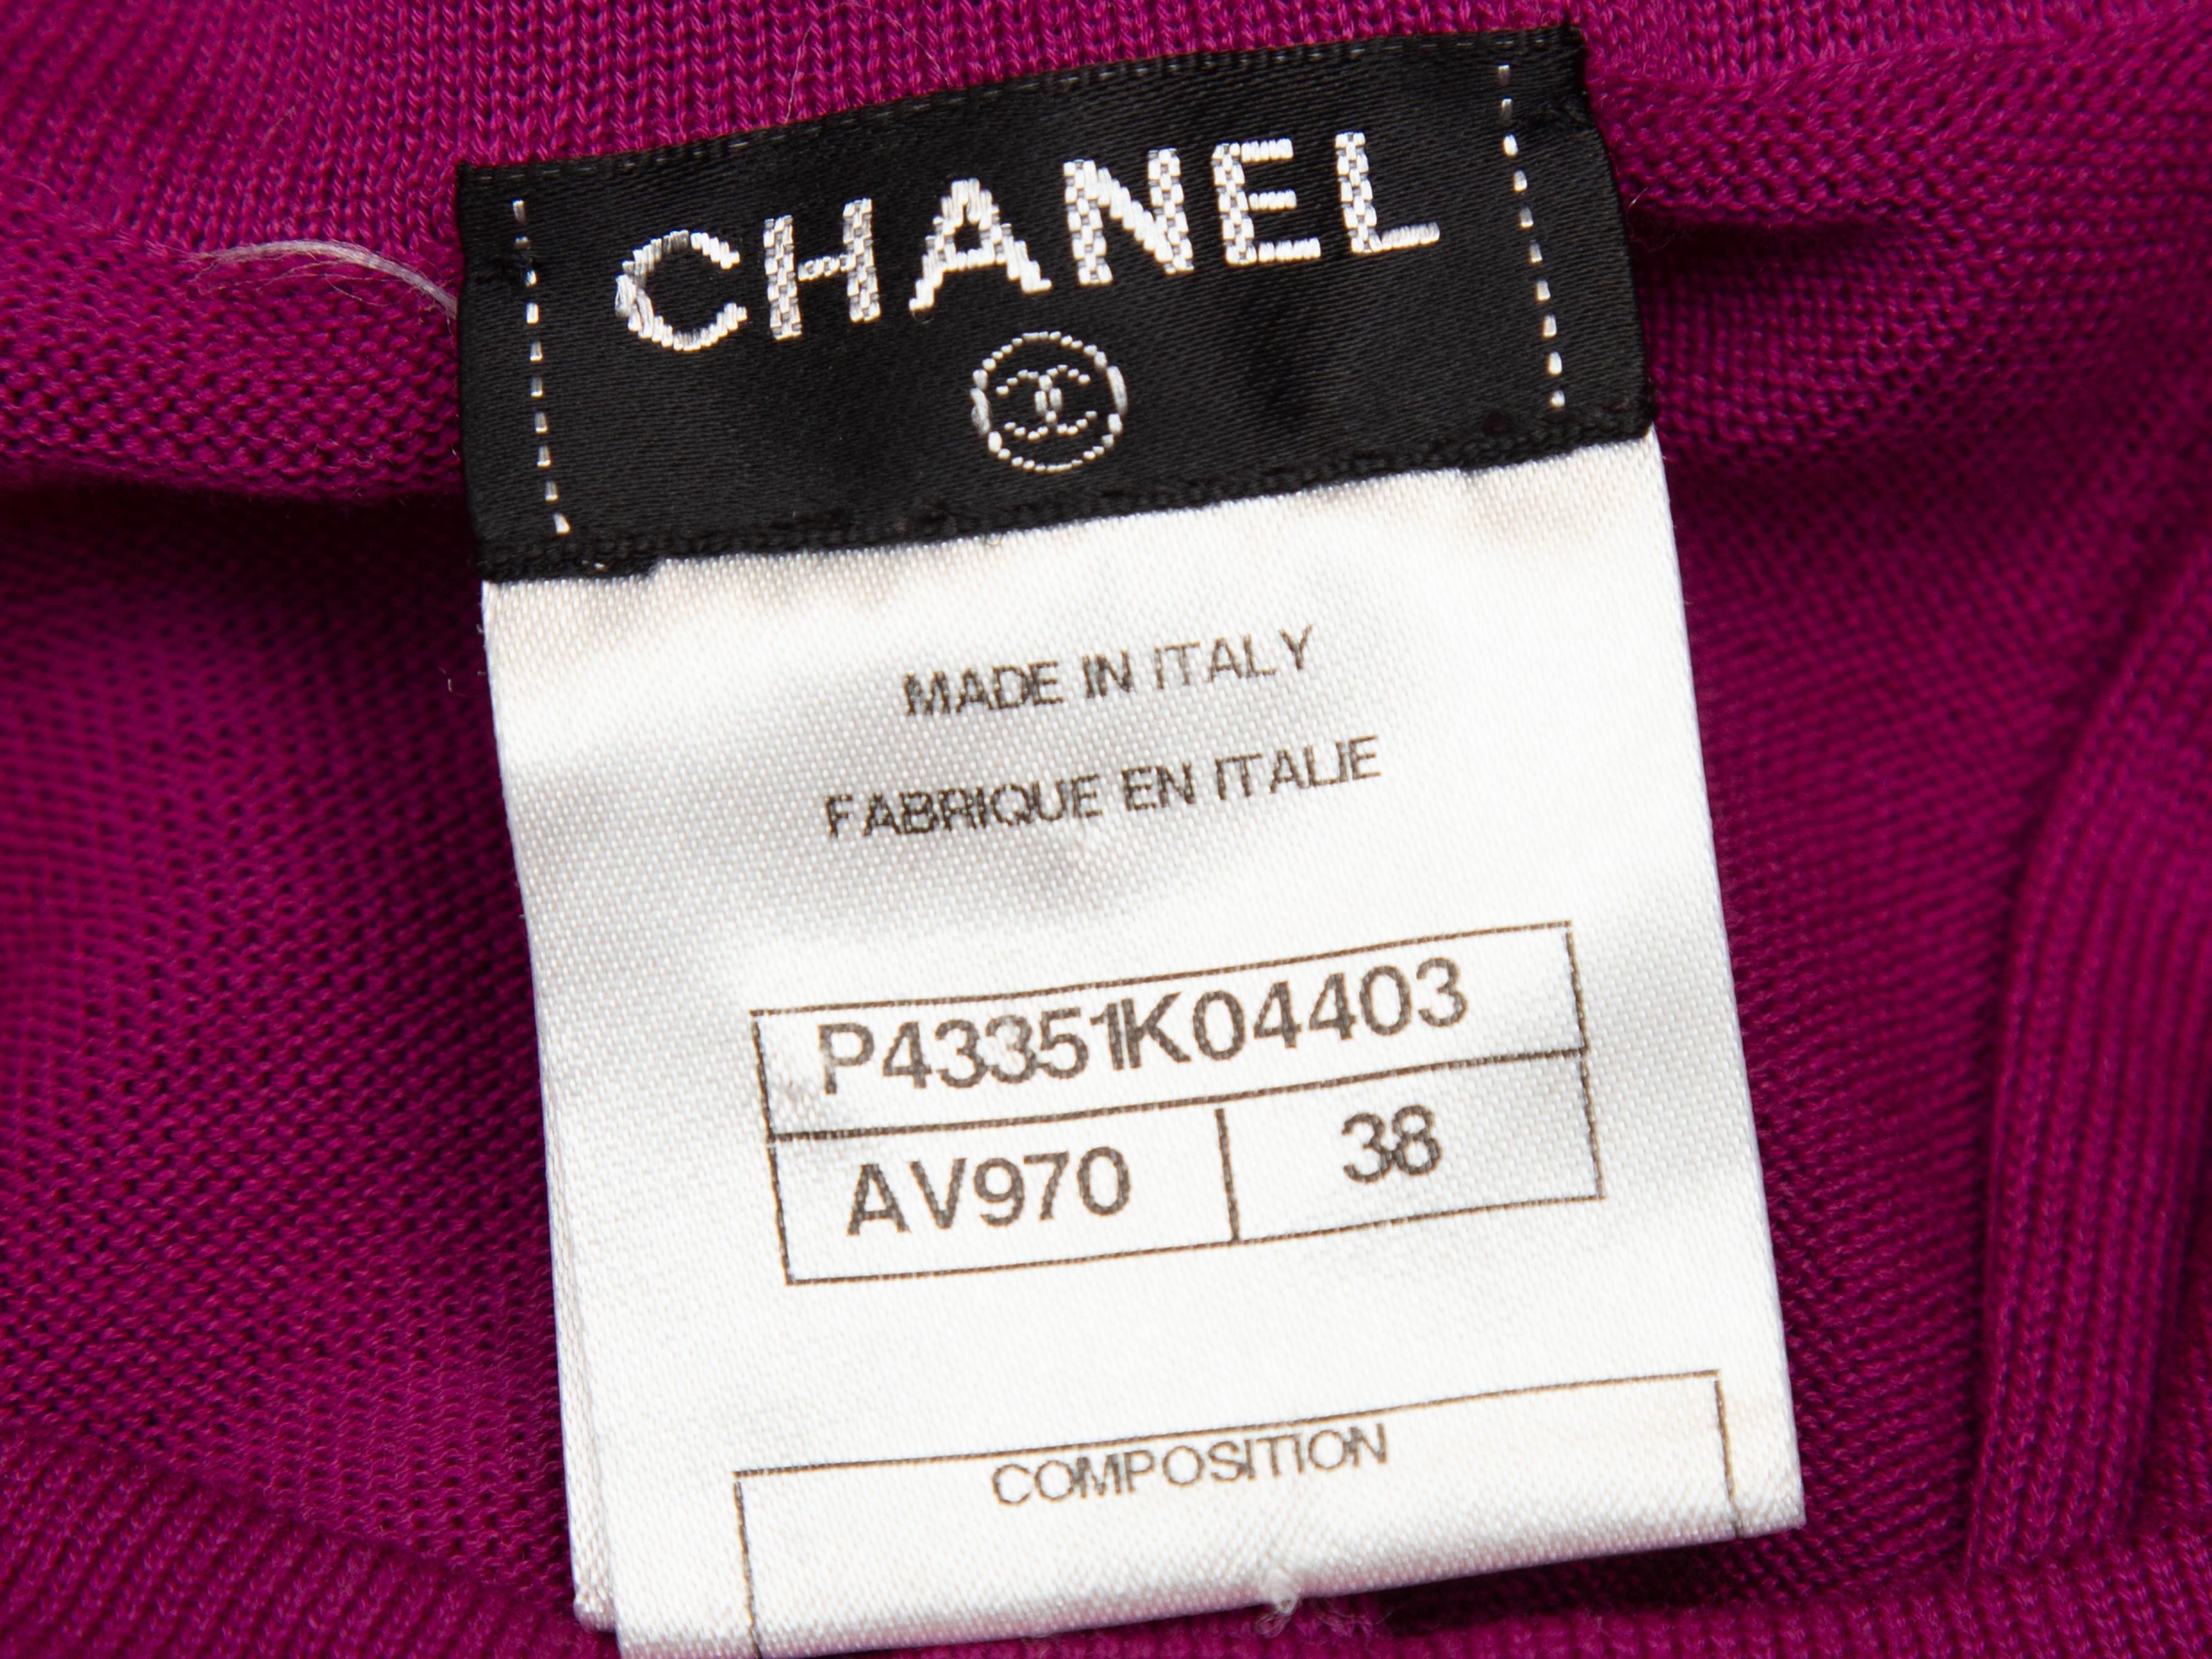 Product details: Magenta cotton knit sleeveless top by Chanel. Crew neck. Designer size 38. 28